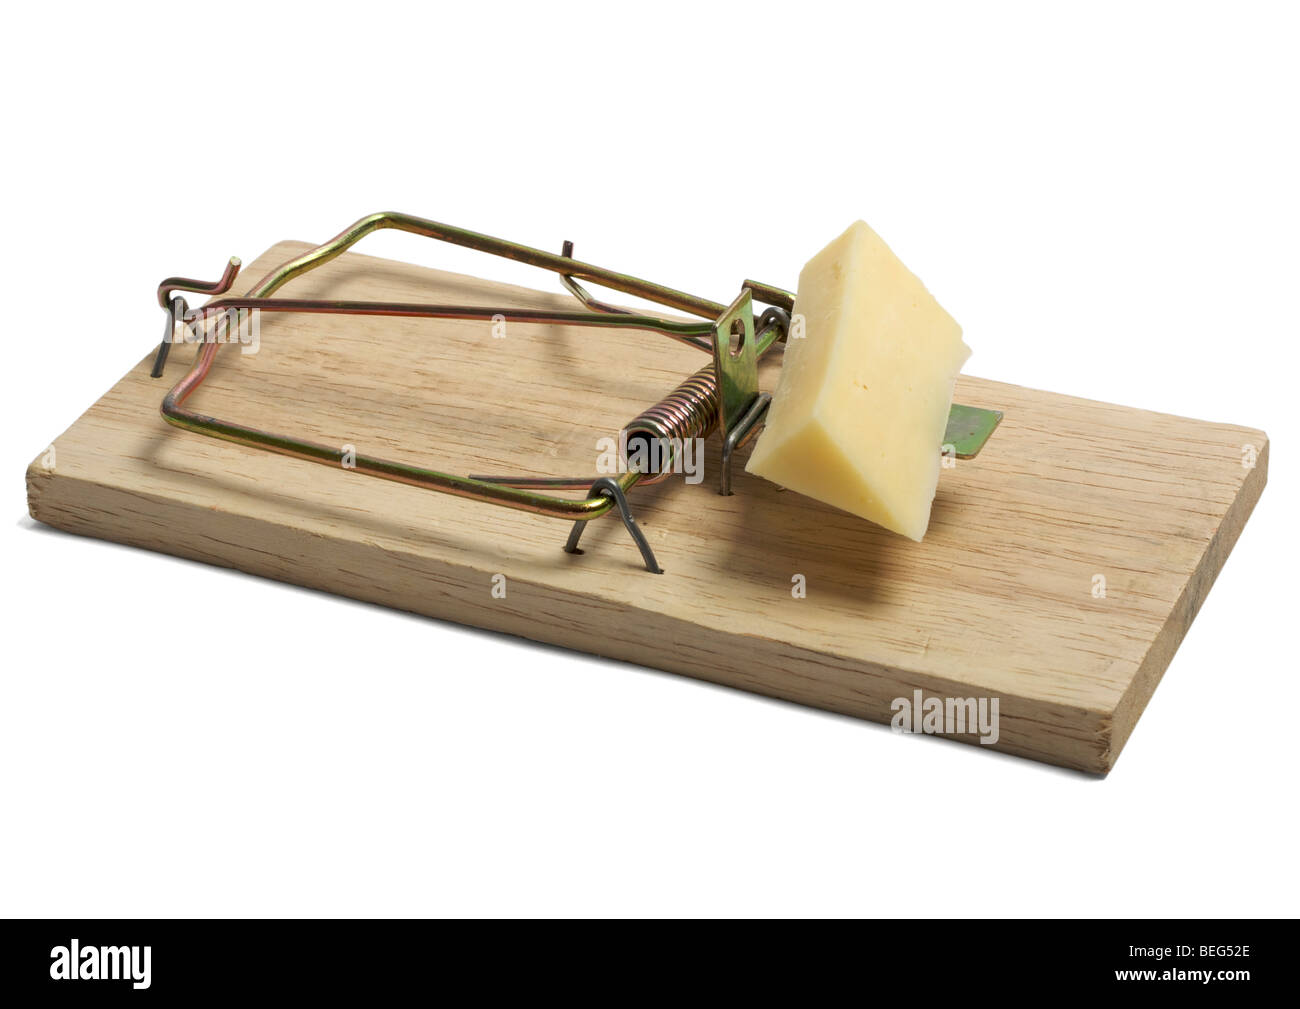 https://c8.alamy.com/comp/BEG52E/mouse-trap-with-cheese-on-white-background-BEG52E.jpg